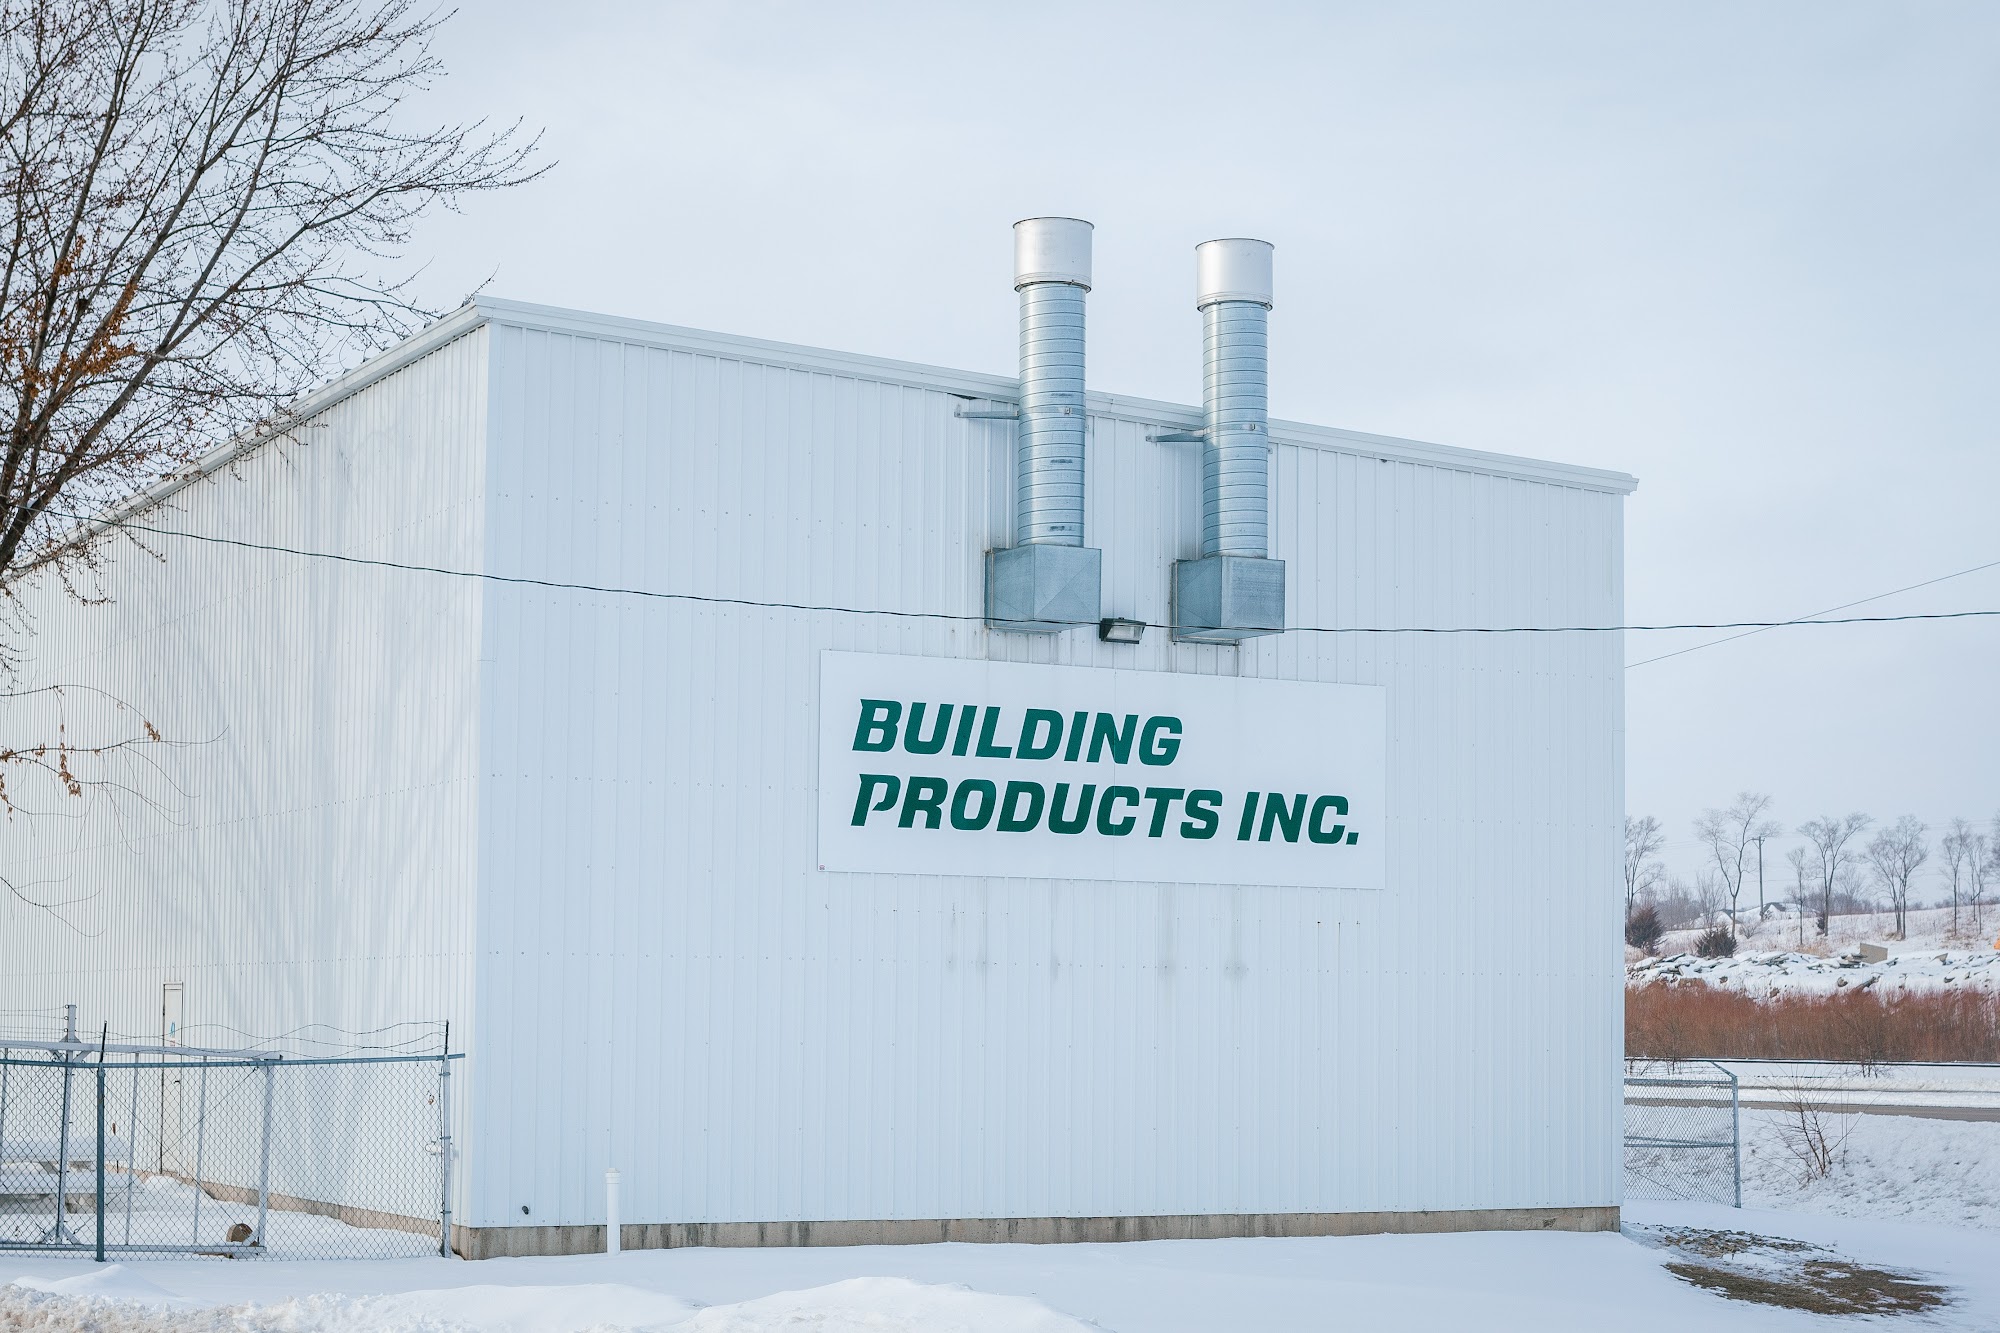 Building Products Inc. of Iowa